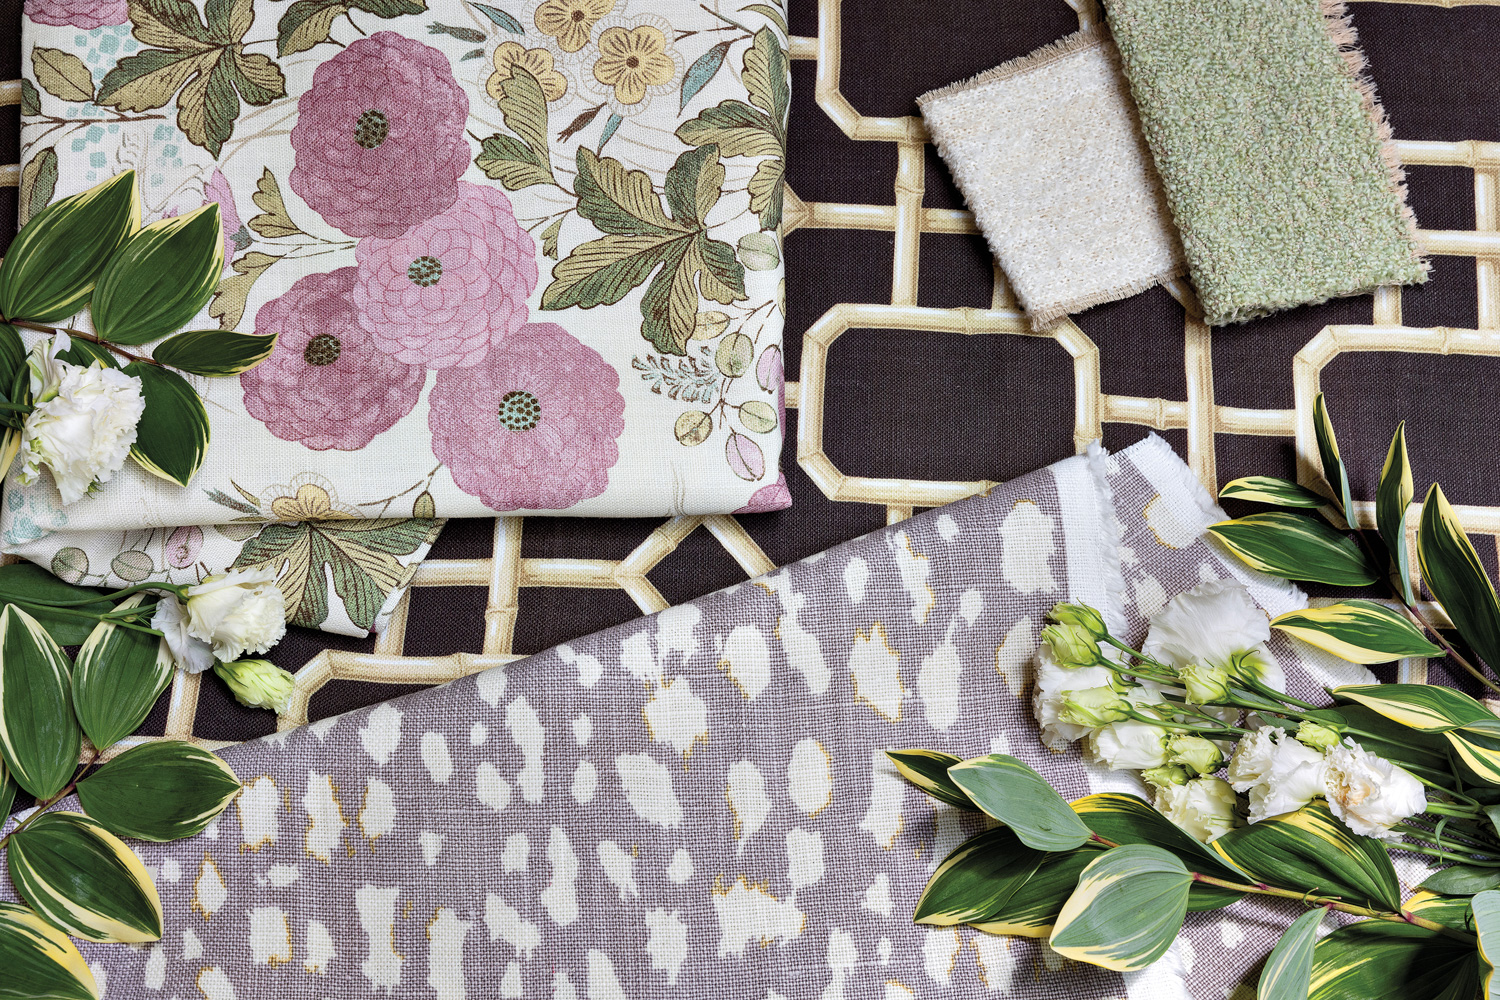 Jan Showers x Kravet's patterned and floral fabric samples with fresh flowers and greenery